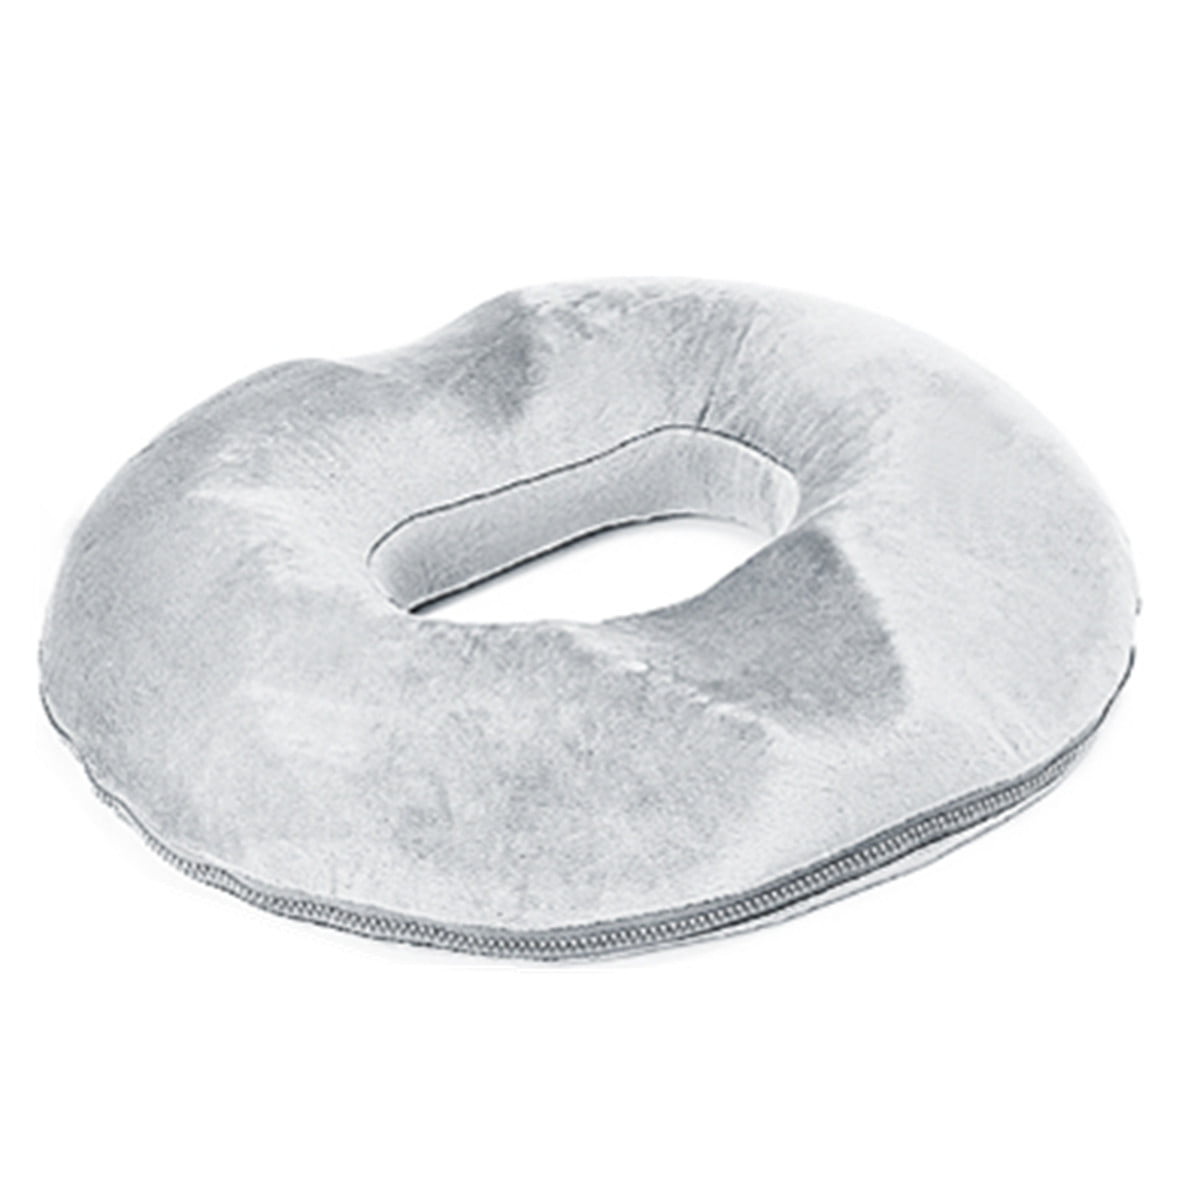 Pressure Sores Coccyx & Hip Pain Post Natal AOOPOOMemory Foam Orthopaedic Donut Seating Cushion,Reduces Sciatica Relief Tailbone Surgery